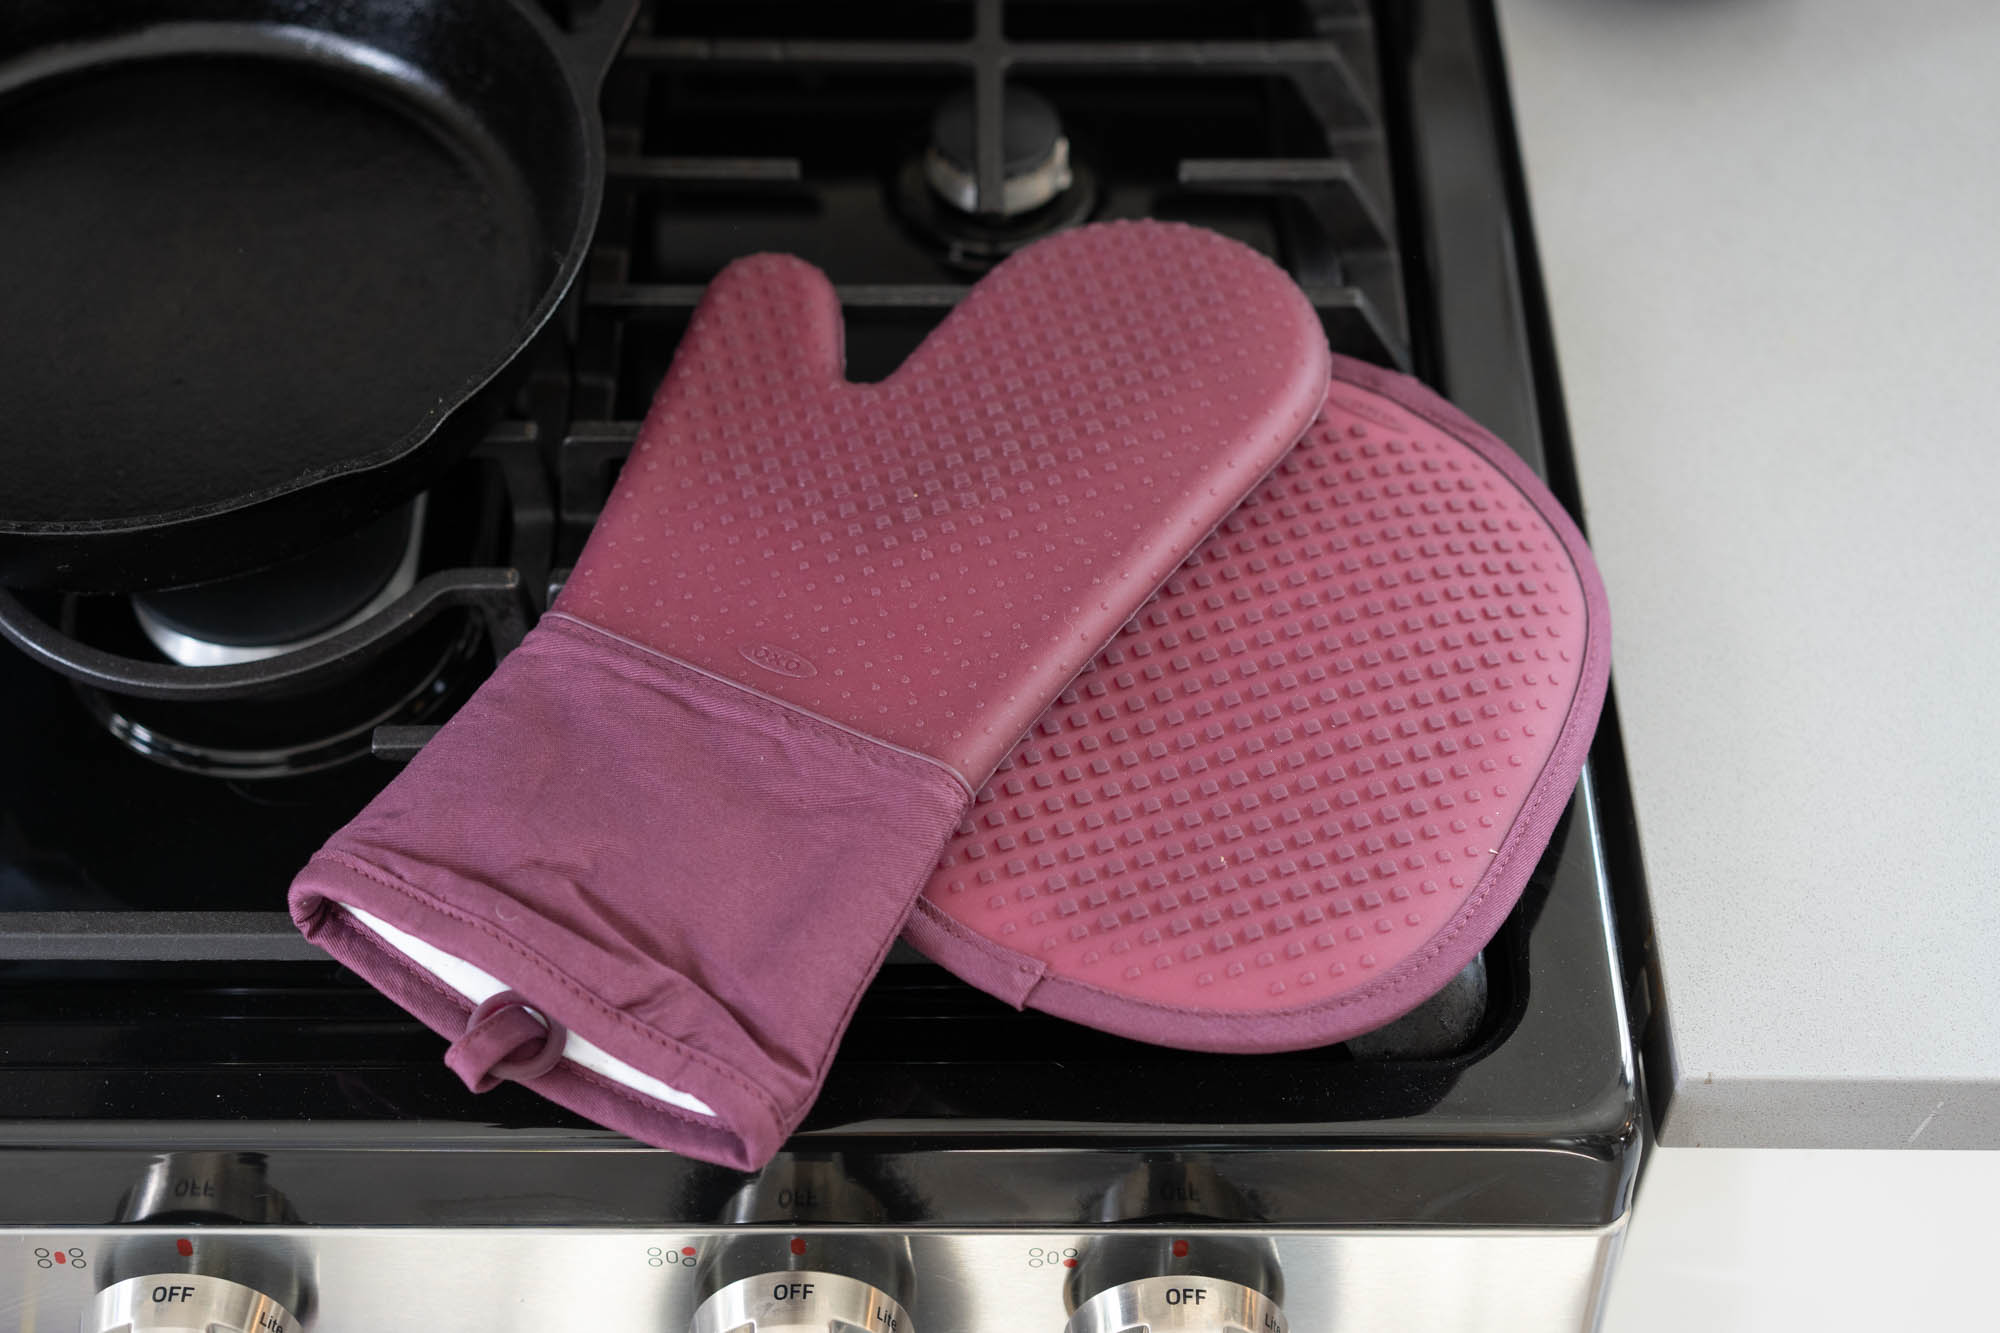 The Best Pot Holders and Oven Mitts 2019